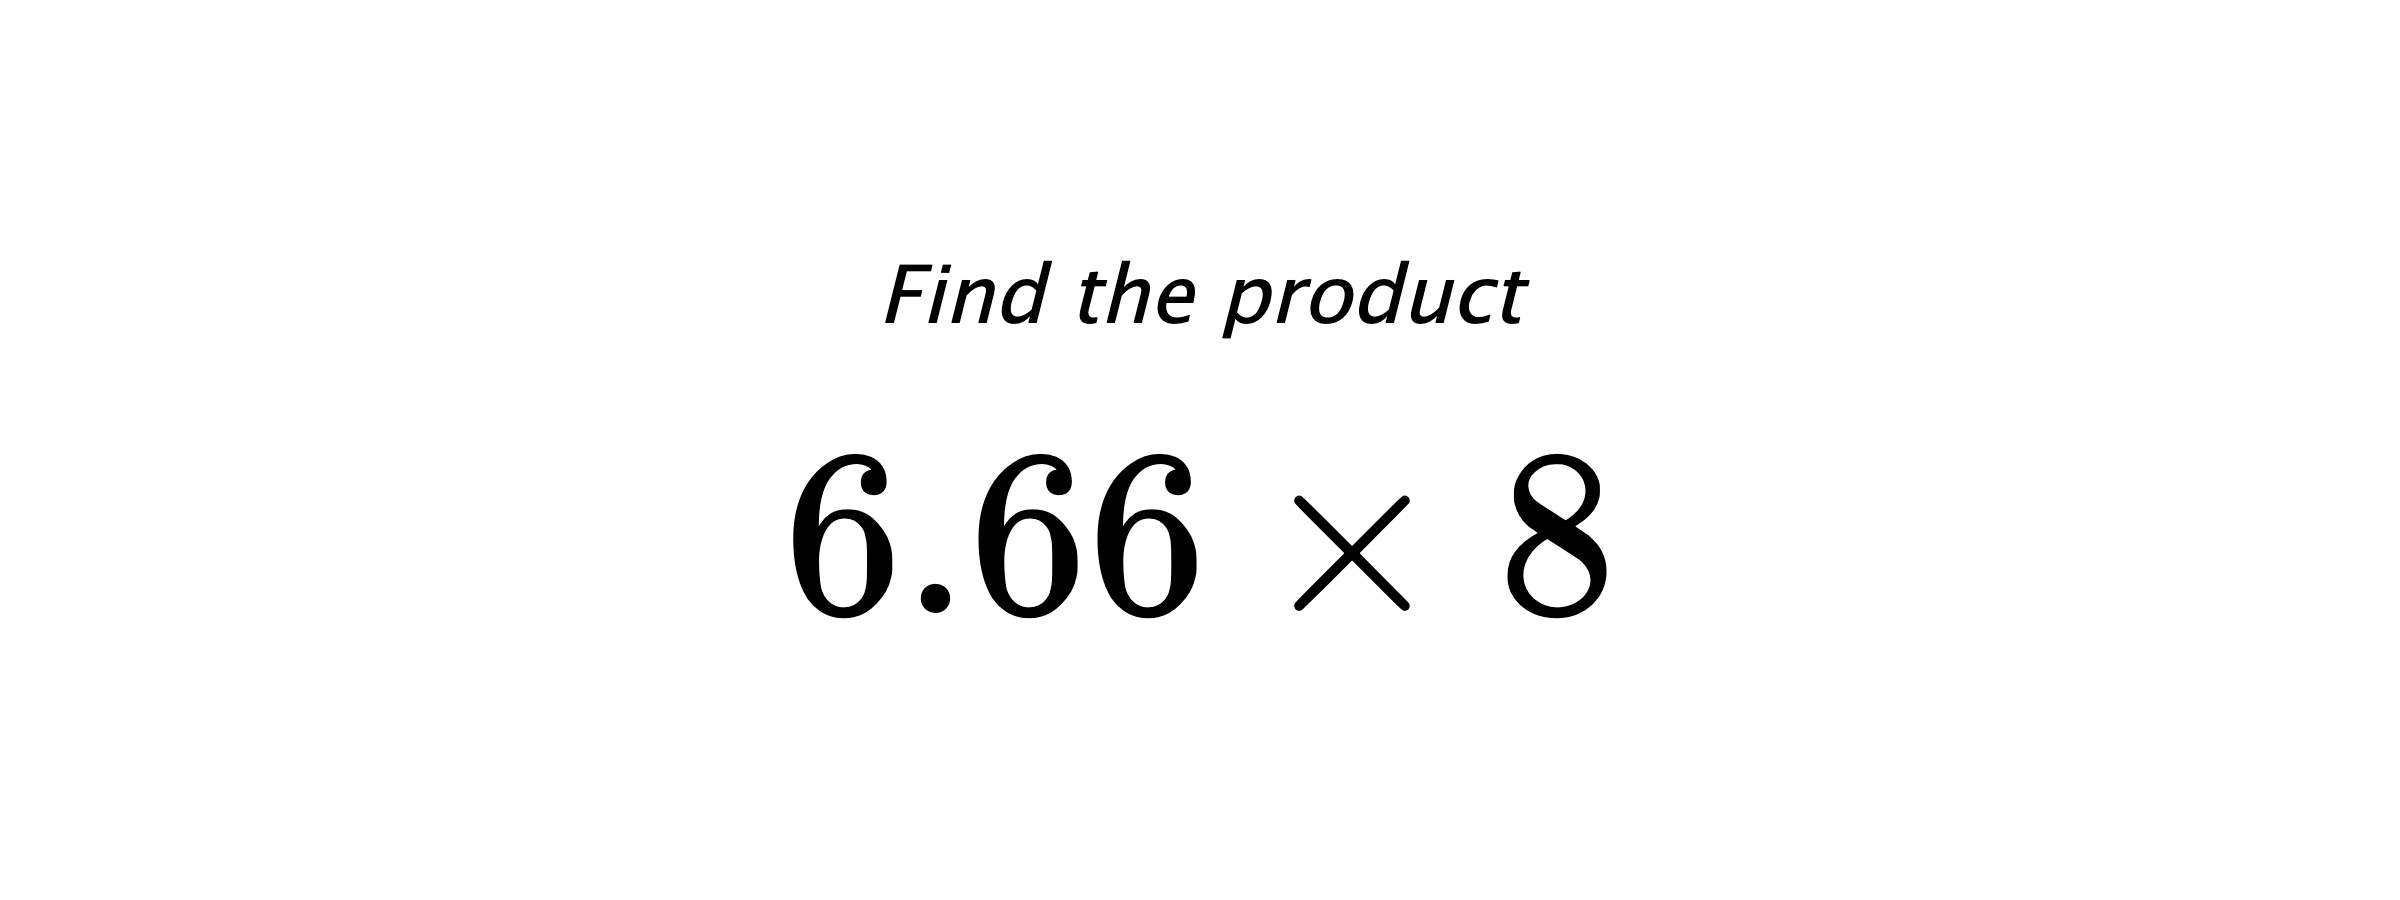 Find the product $ 6.66 \times 8 $